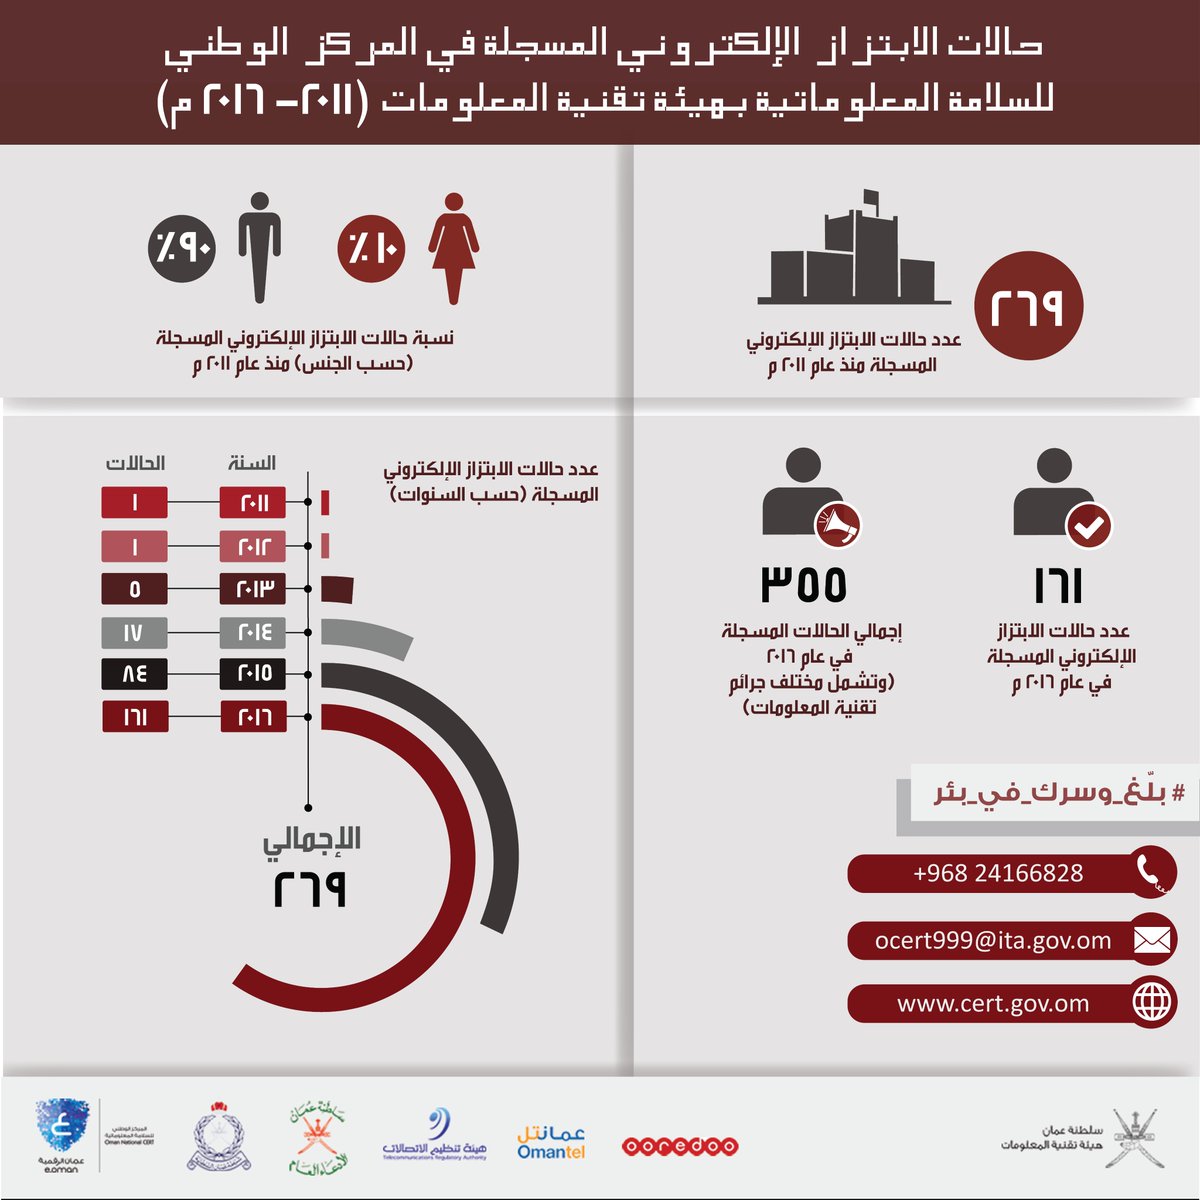 Cyber Blackmail Infographic - Oman (Arabic)